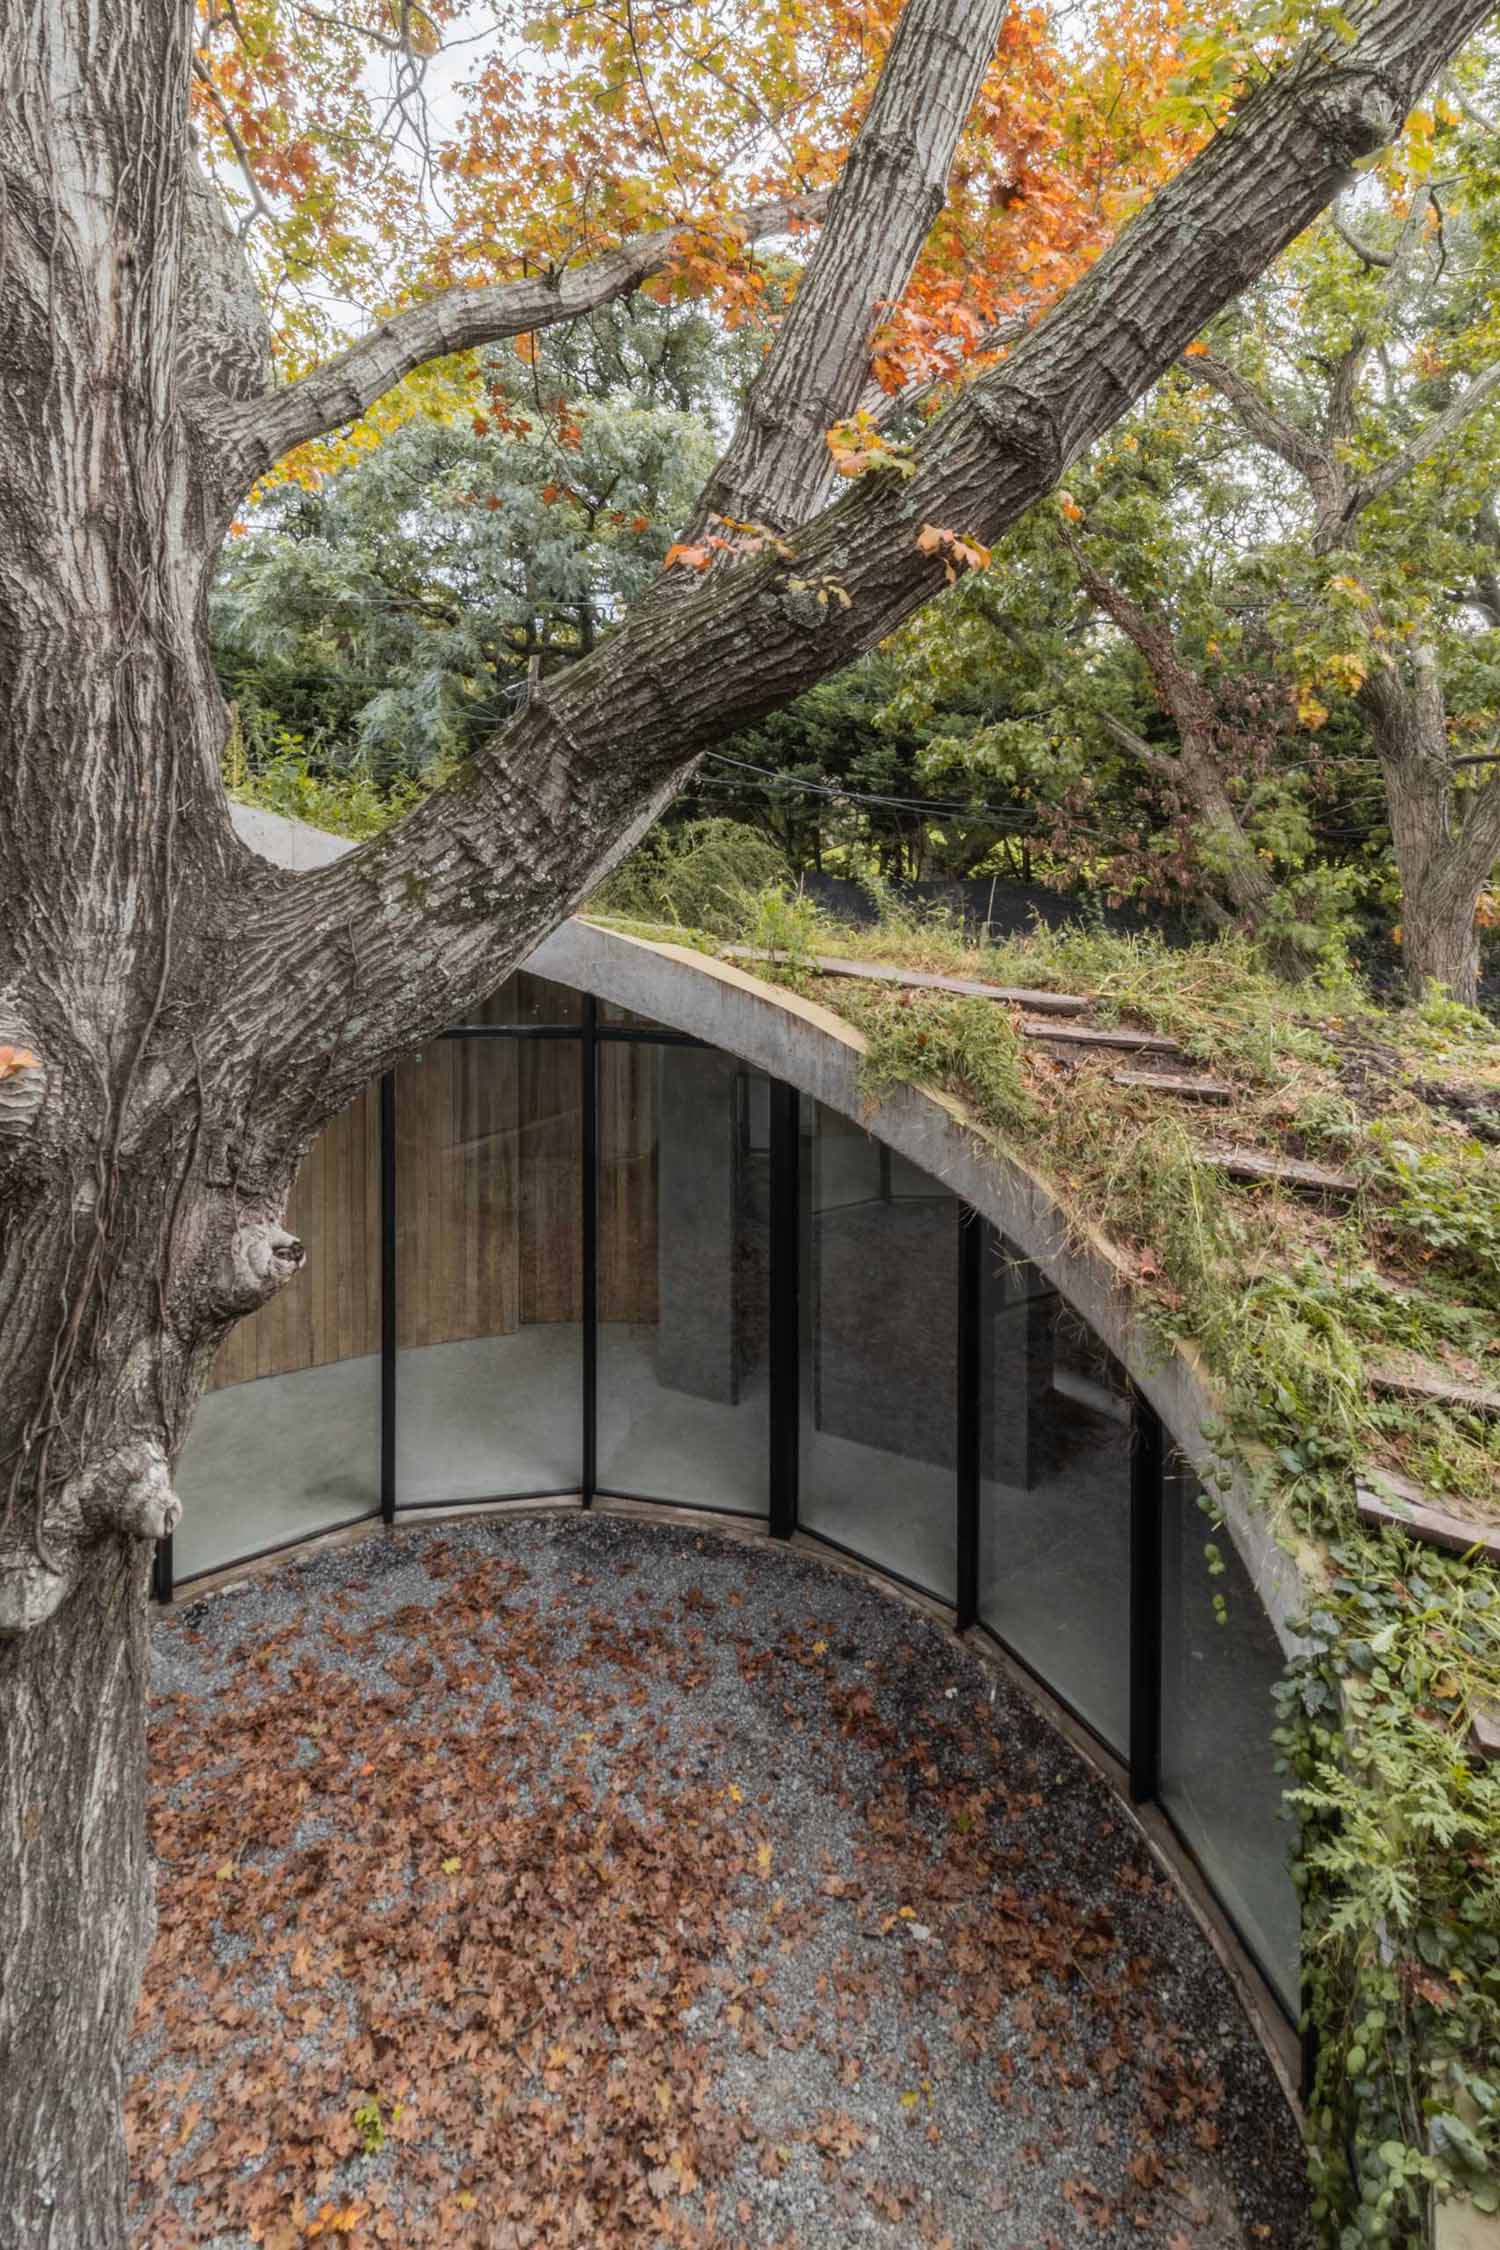 A contemporary ،me that wraps around a 100-year-old oak tree and has a green roof.